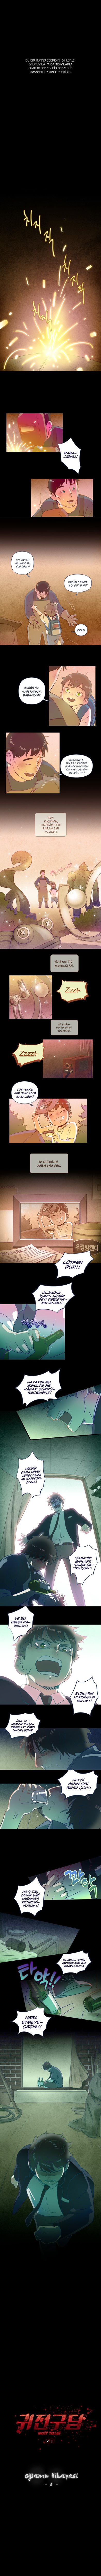 Ghost Teller: Chapter 27 - Page 2